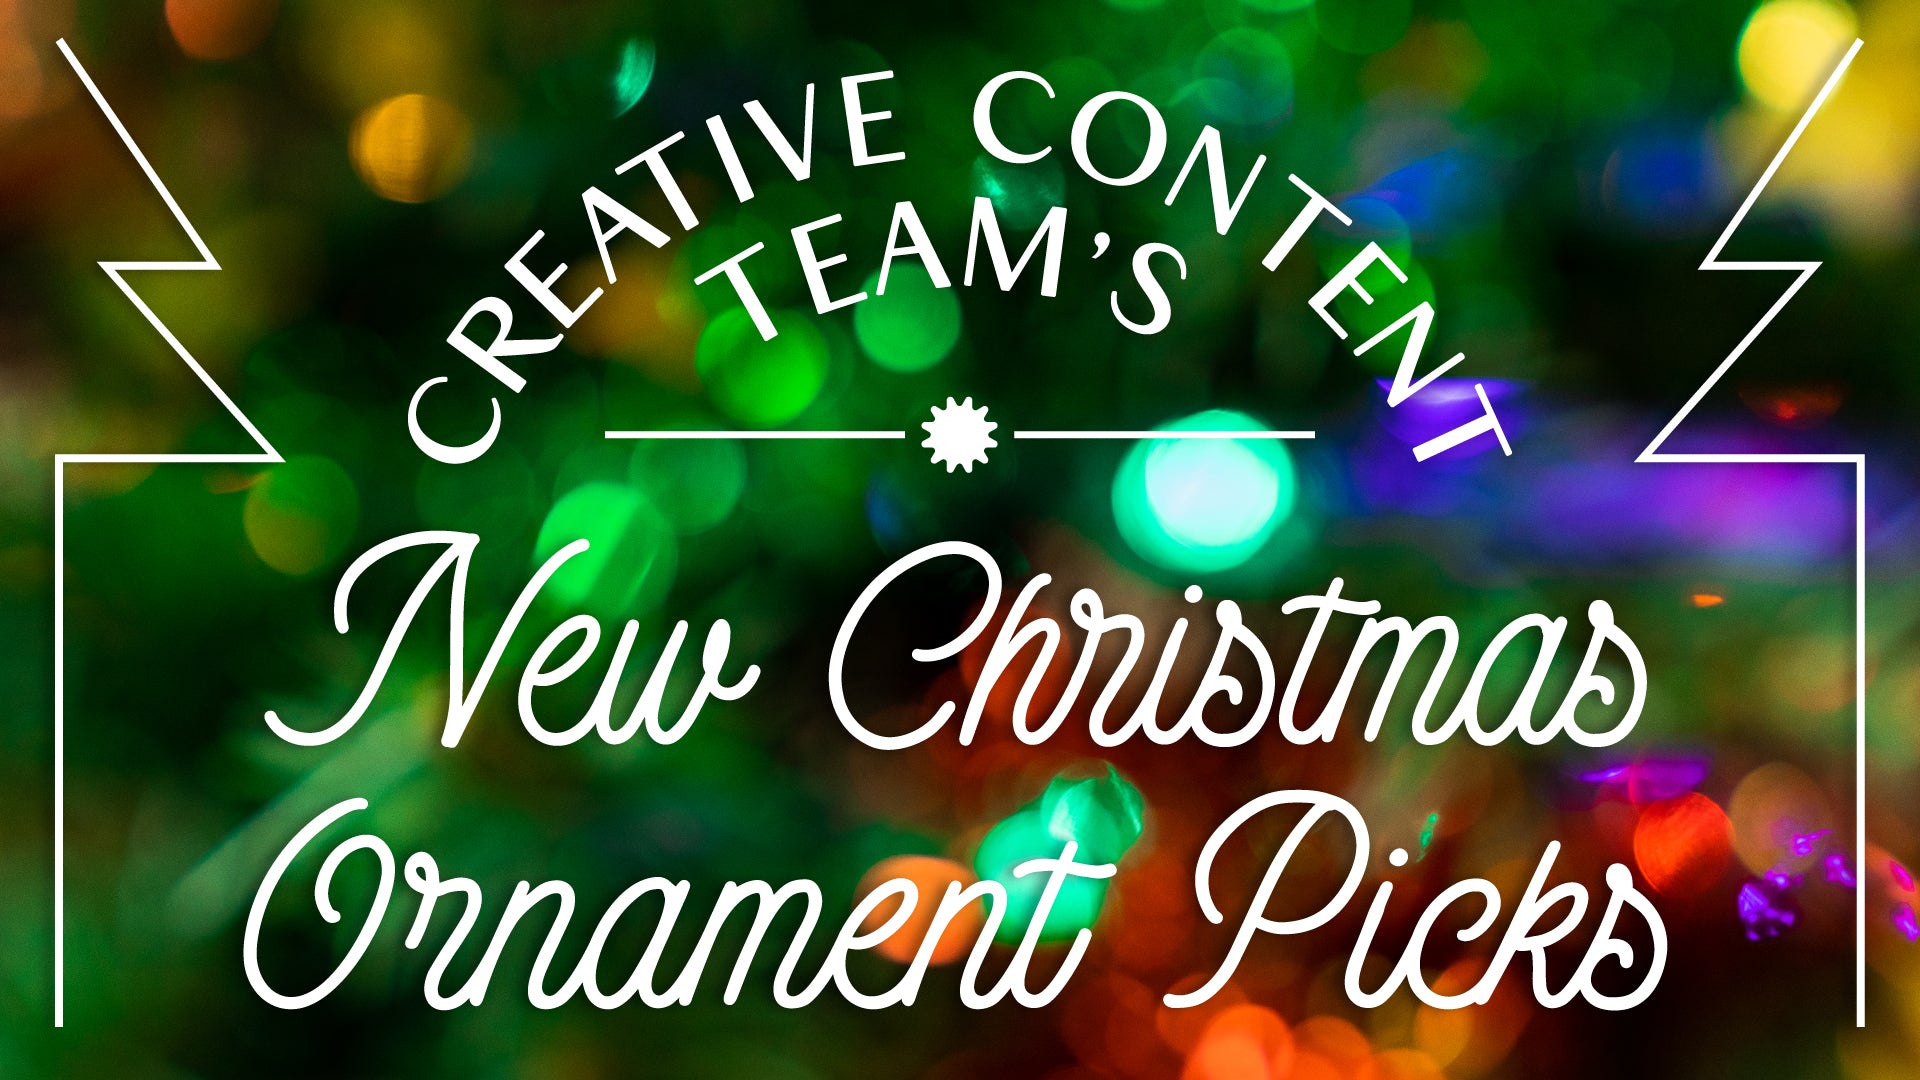 Our Creative Content Team Picks a New Ornament to Add to Their Christmas Tree!